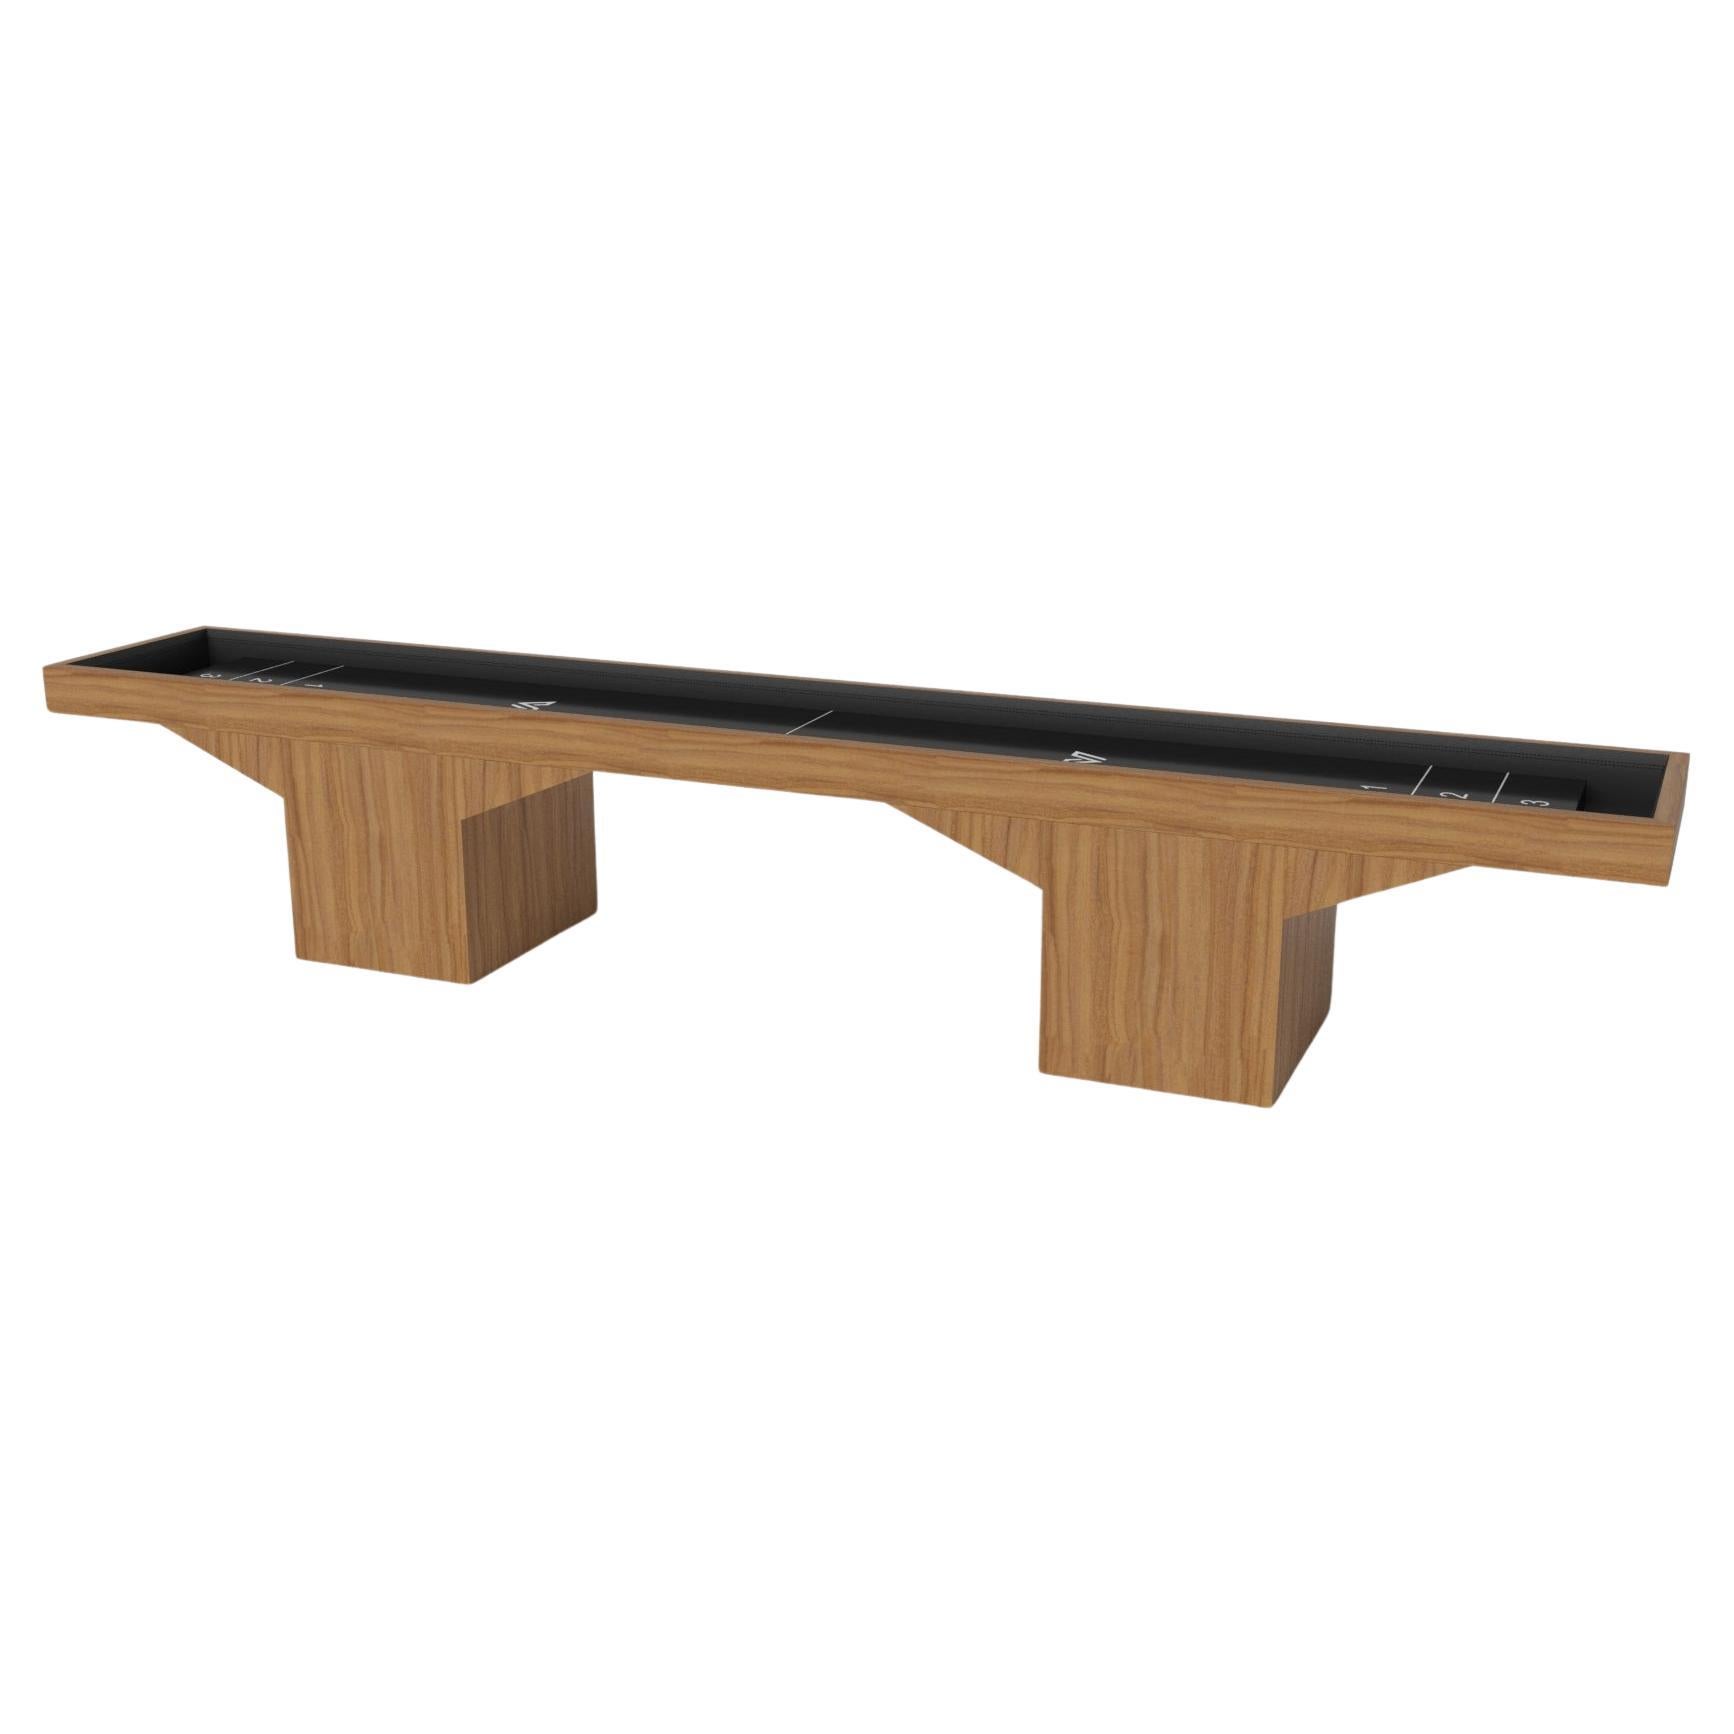 Elevate Customs Trestle Shuffleboard Tables /Solid Teck Wood in 18' -Made in USA